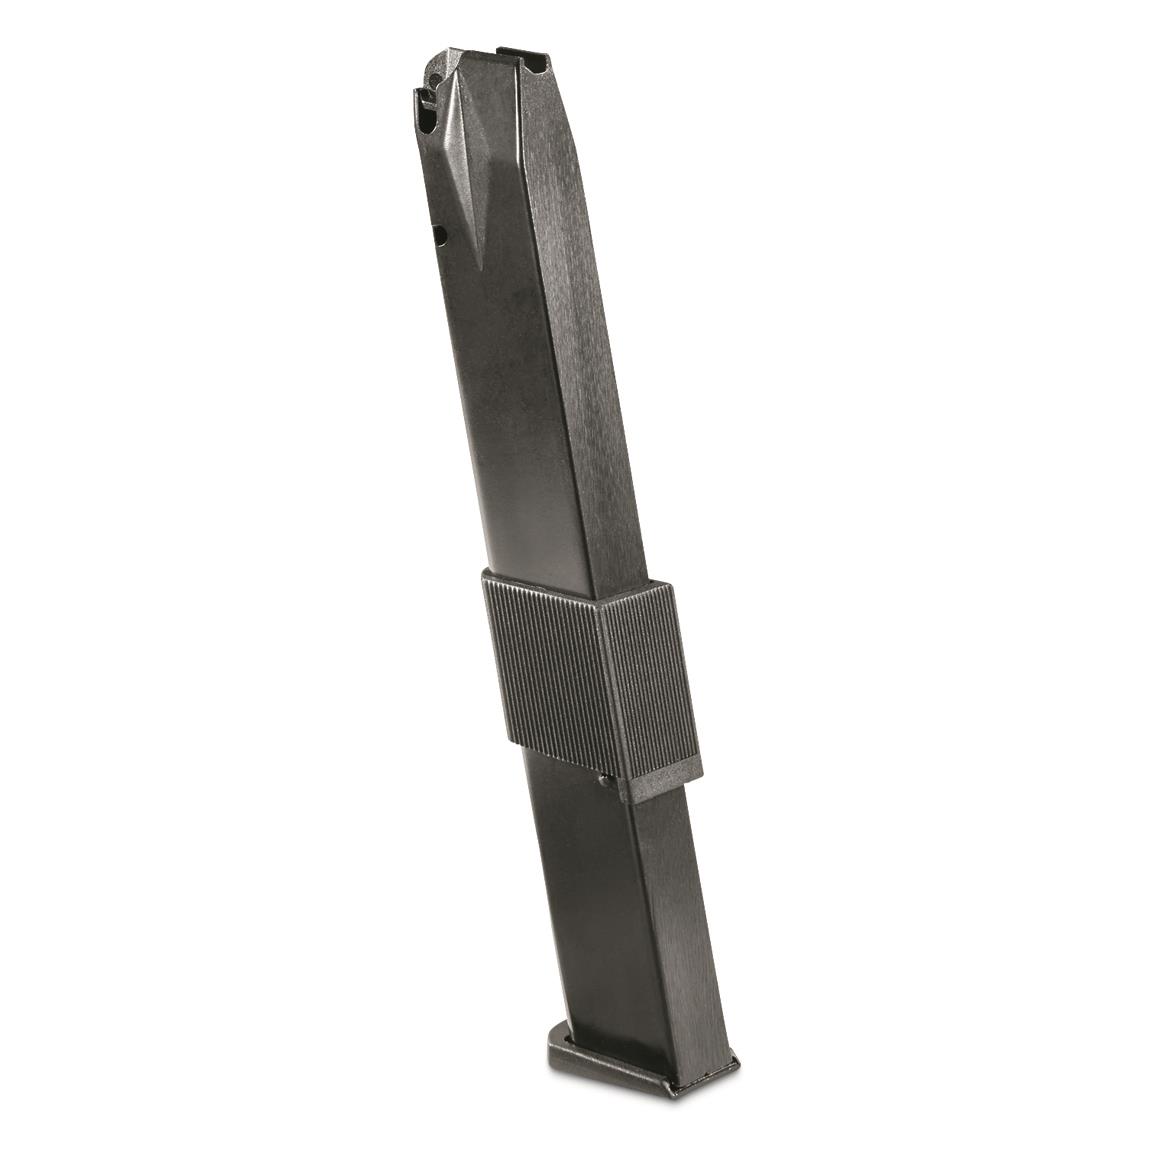 ProMag Canik TP9 Magazine, 9mm, 32 Rounds, Blued Steel